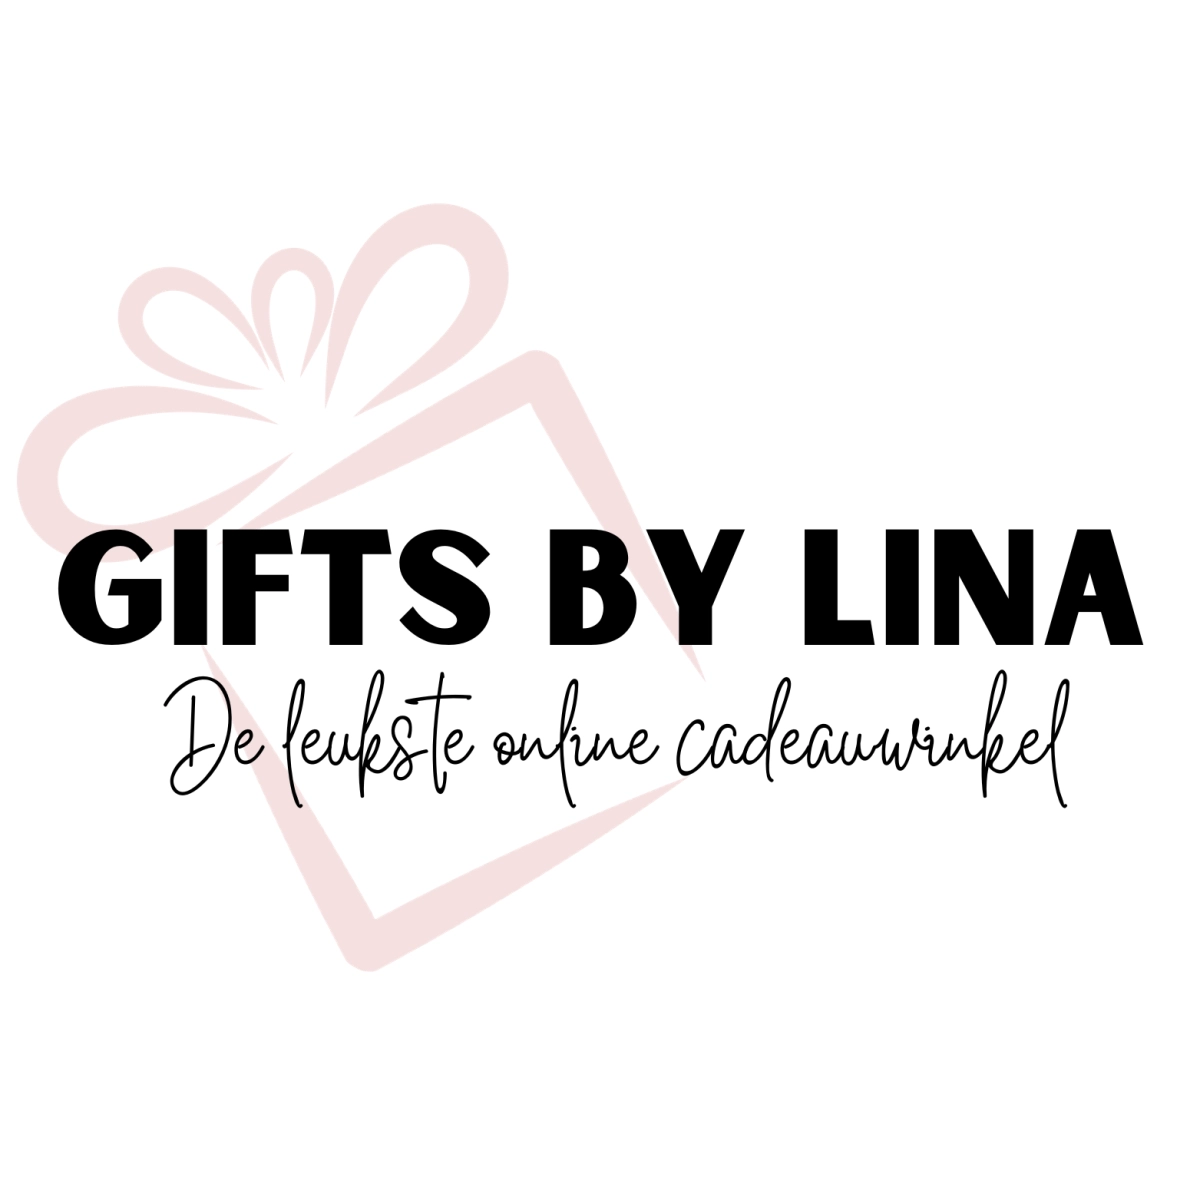 Giftsbylina.nls achtergrond